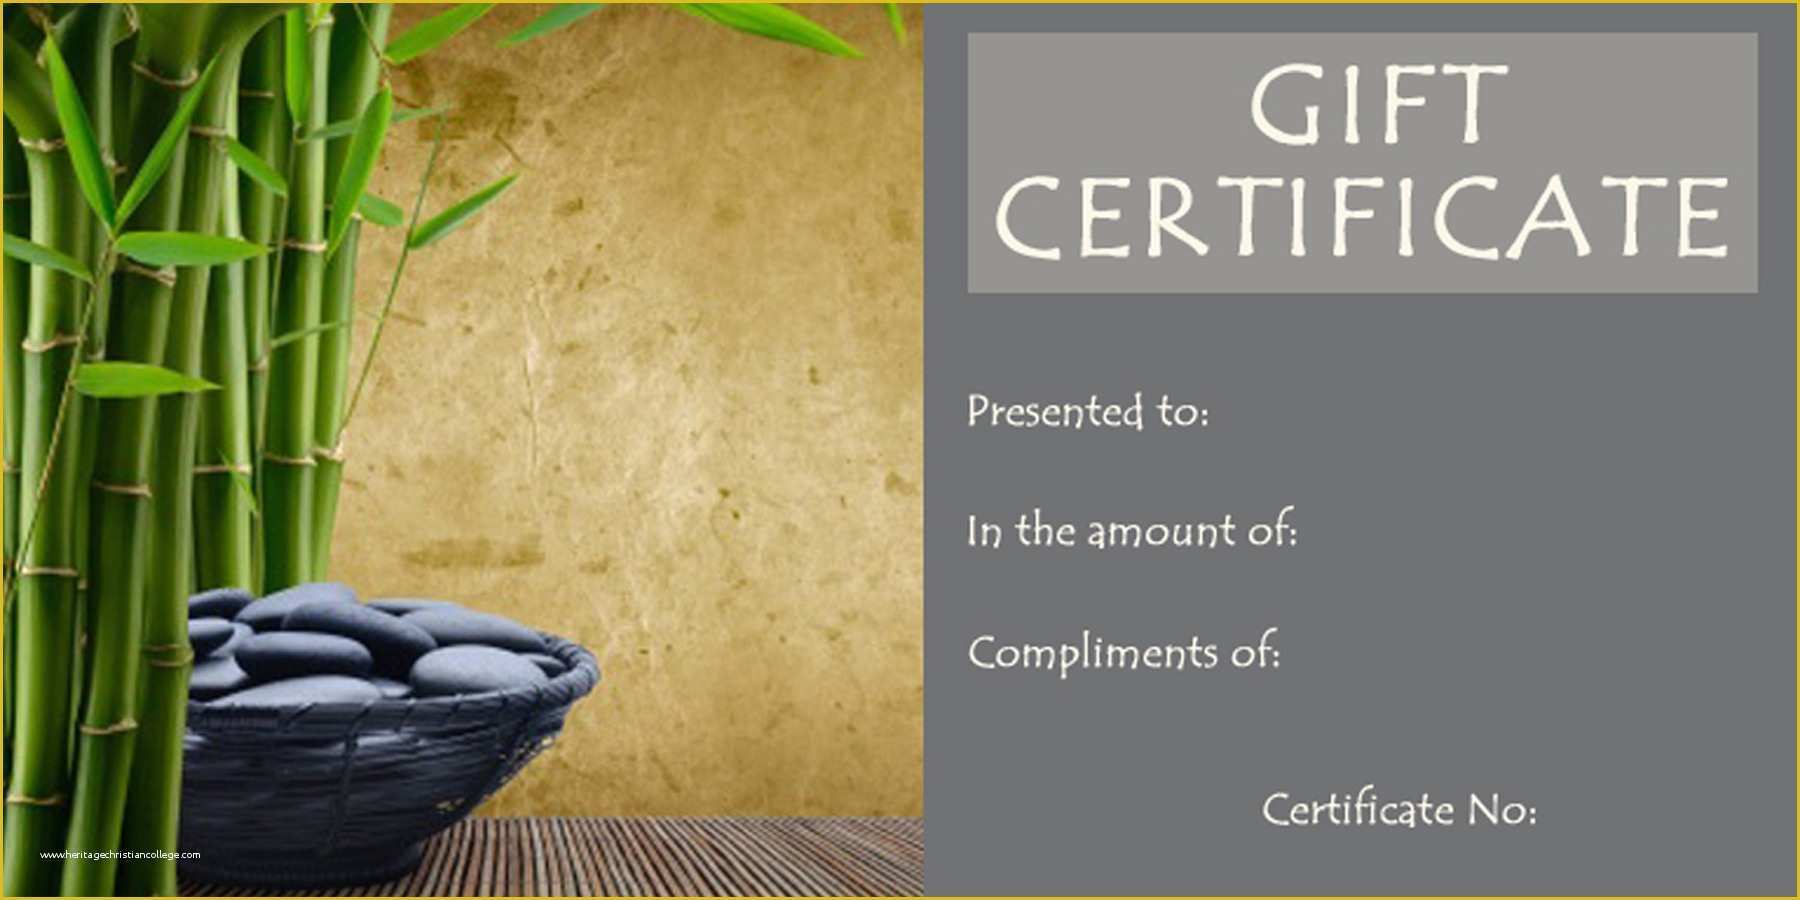 Spa Gift Certificate Template Free Of Psychic Readings asheville Psychic Pet Psychic